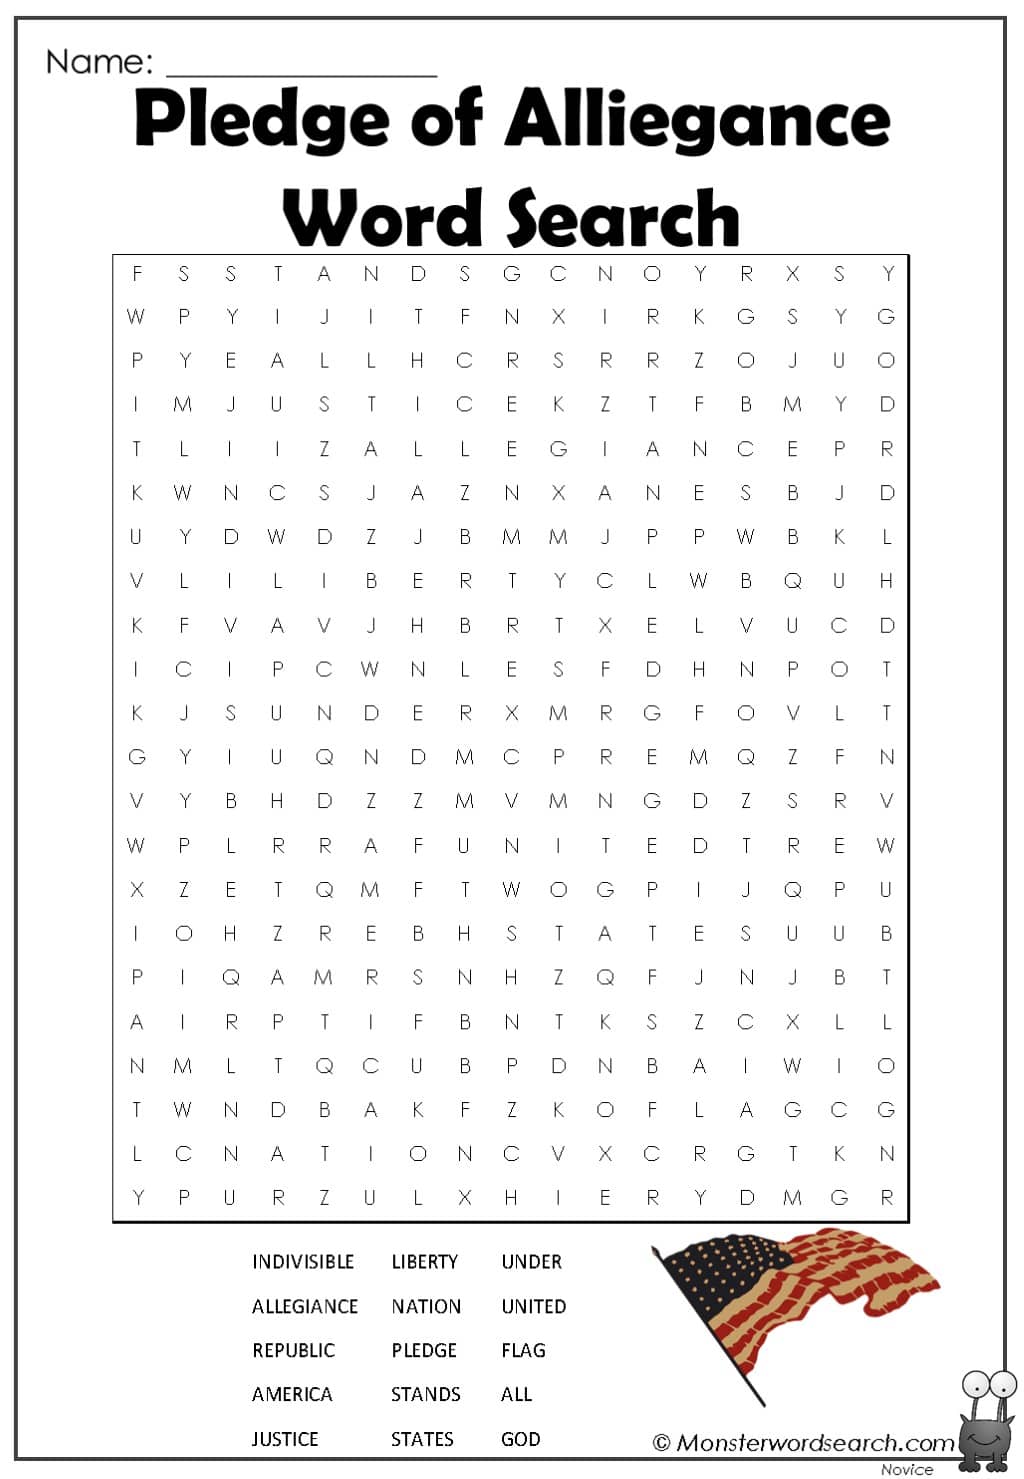 pledge-of-alliegance-word-search